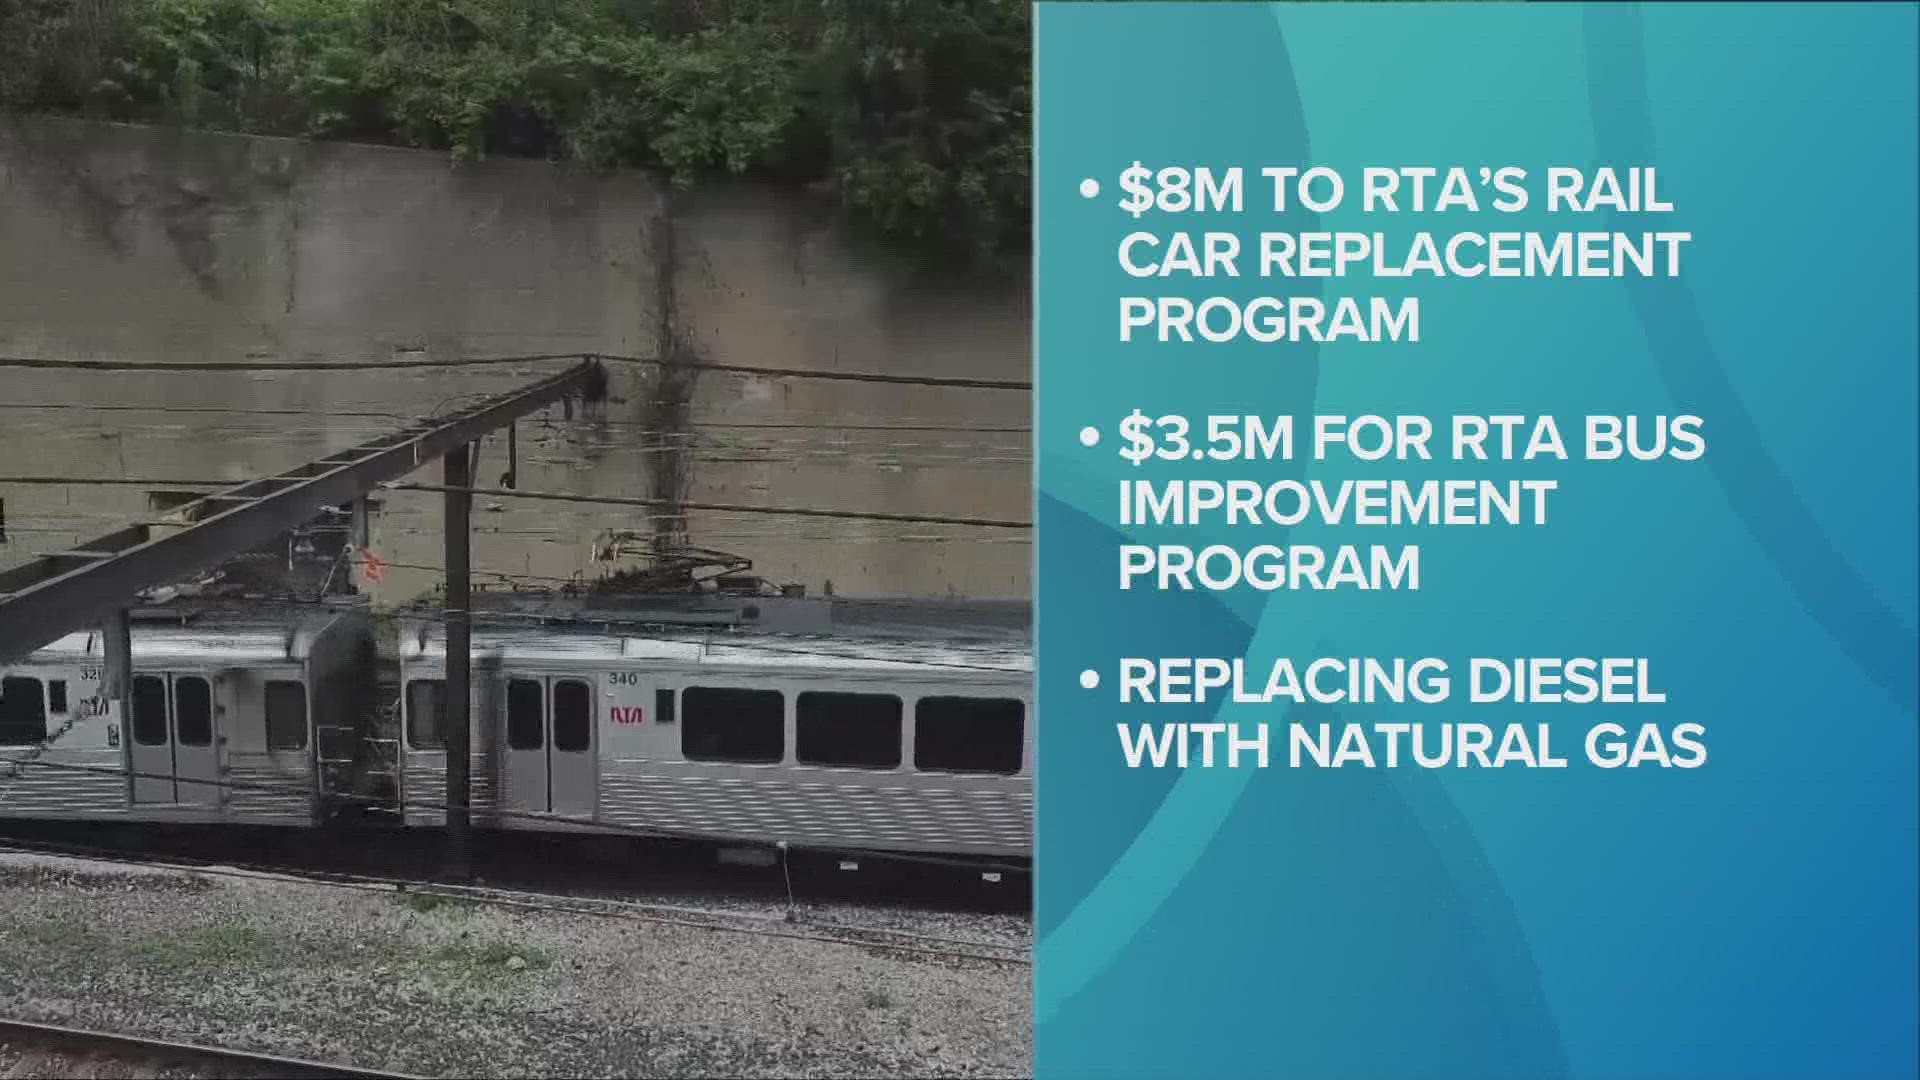 The funding from ODOT will go toward the Greater Cleveland Regional Transit Authority's Rail Car Replacement Program and Bus Improvement Program.